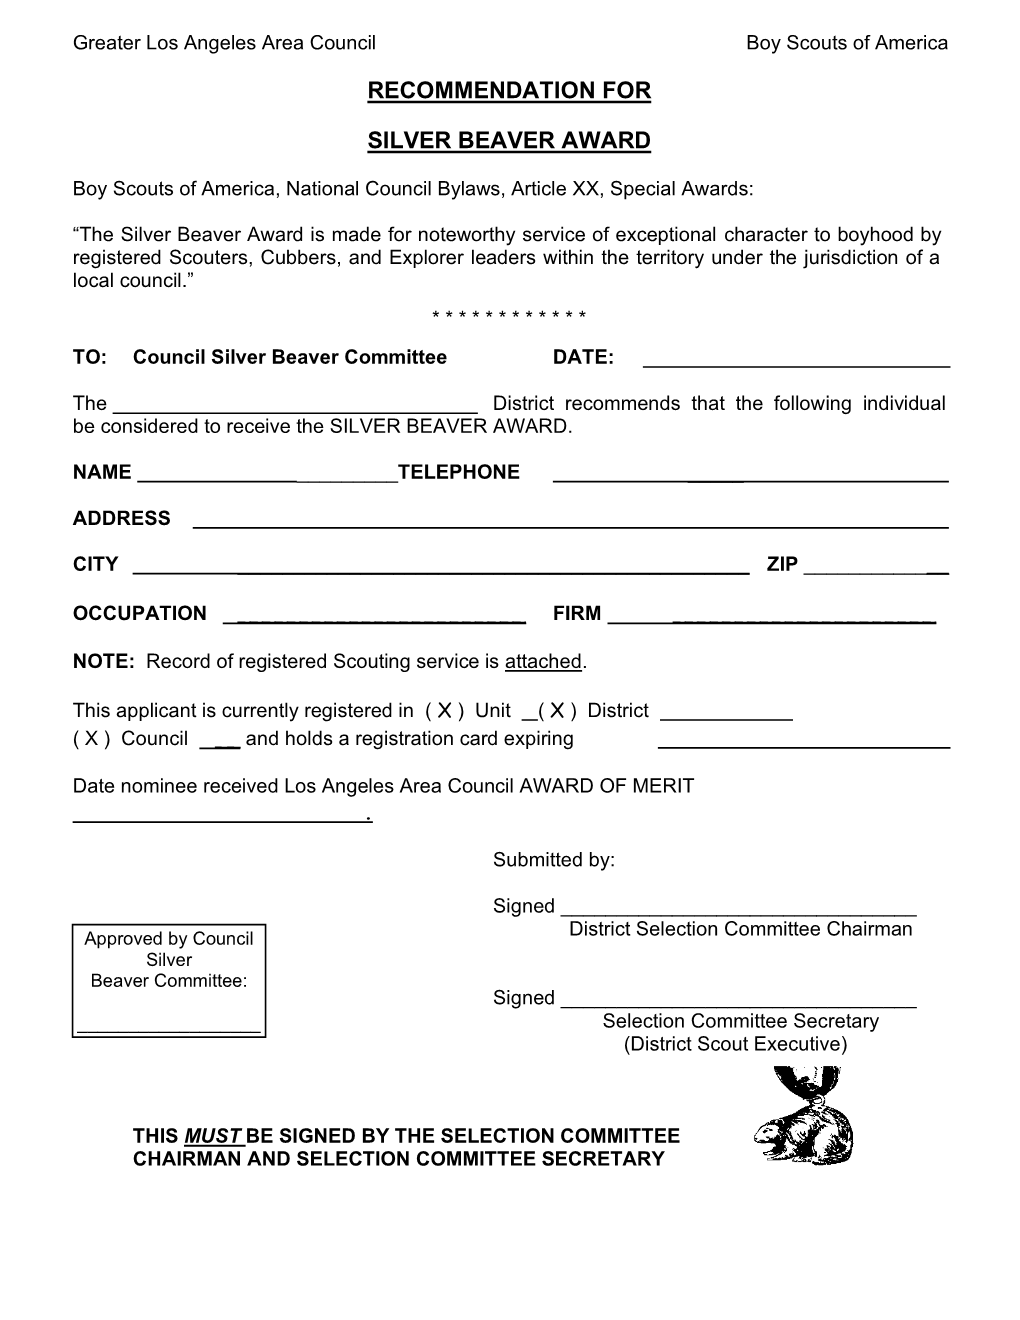 Los Angeles Area Council Boy Scouts of America